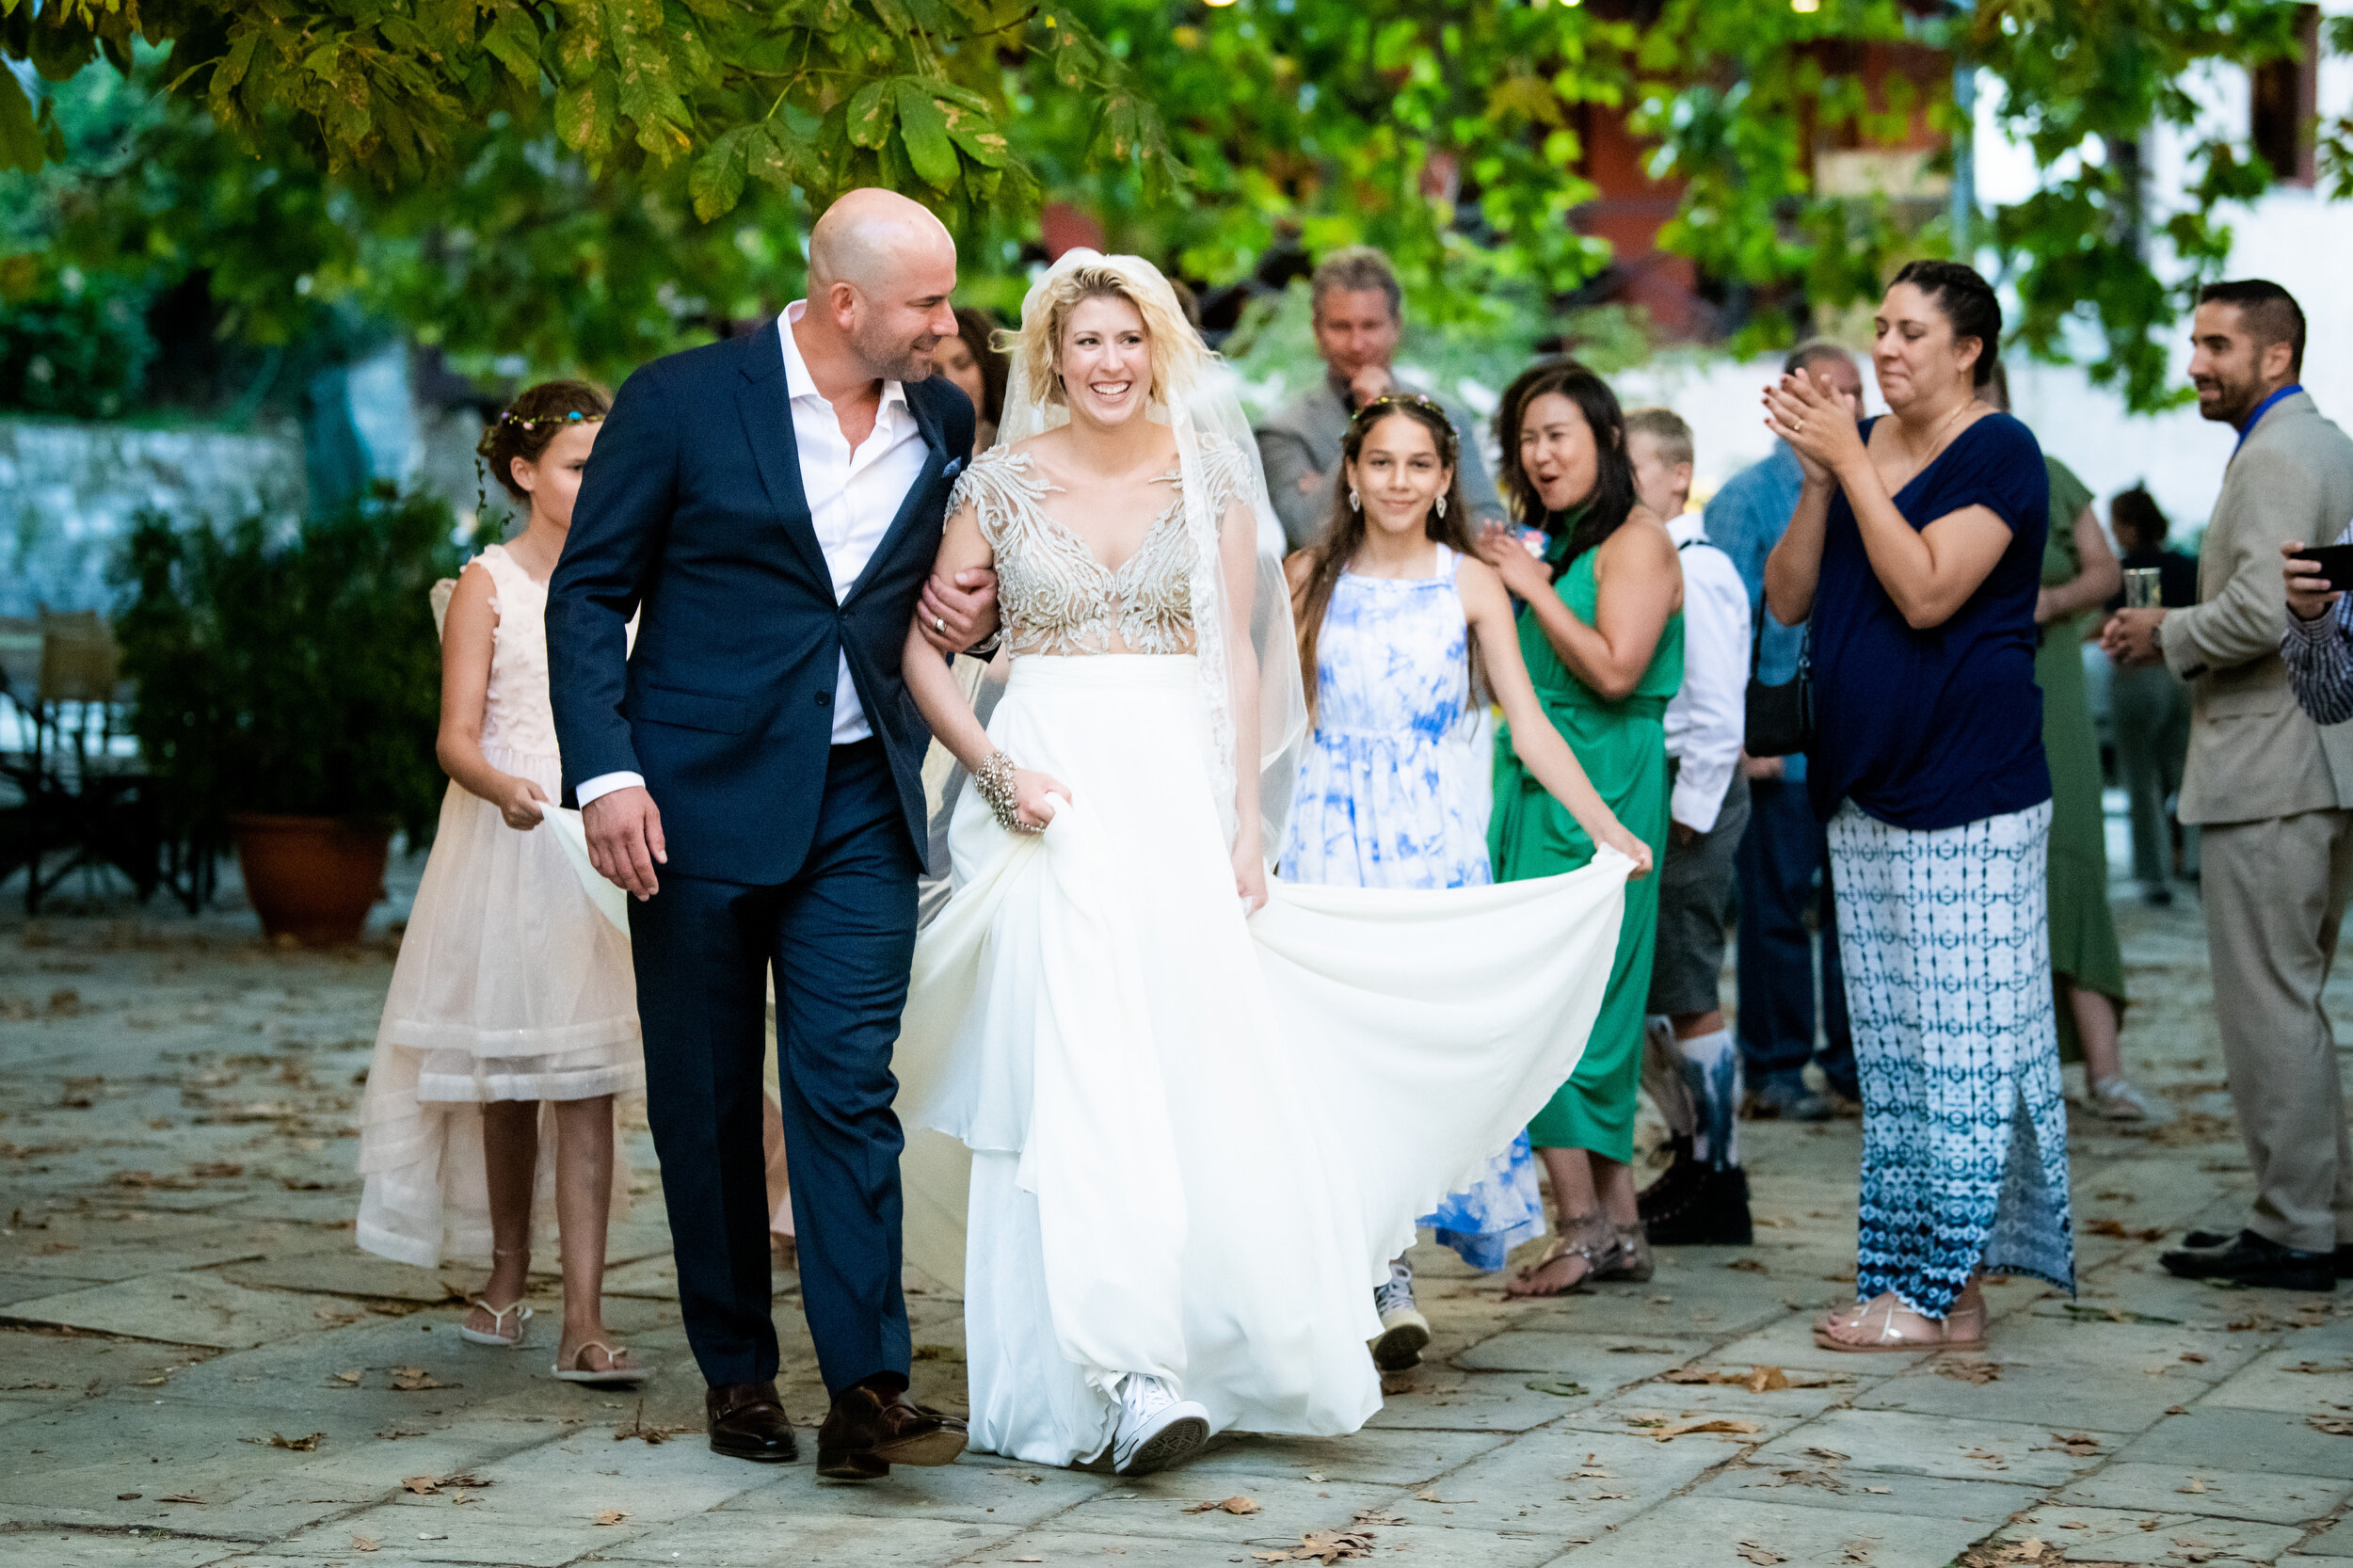 The newly weds and family process from ceremony:  destination wedding photo at the Lost Unicorn Hotel, Tsagarada, Greece by J. Brown Photography.